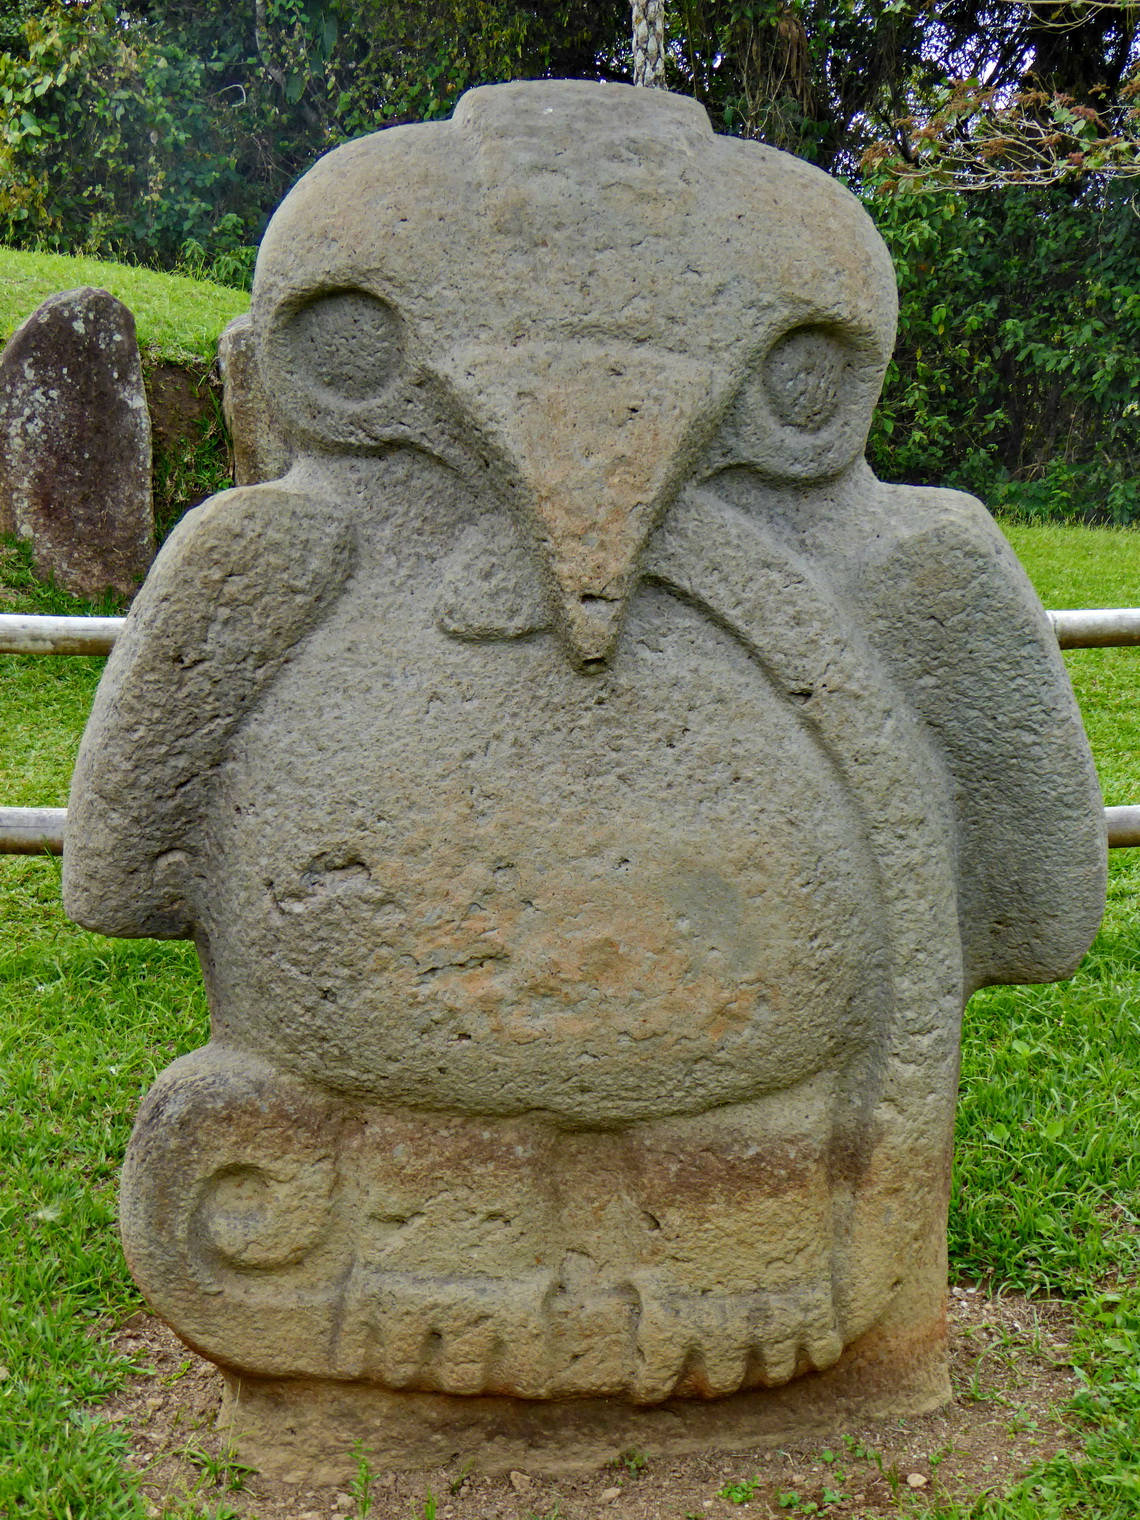 Eagle with snake, one of the most famous effigies of San Agustin